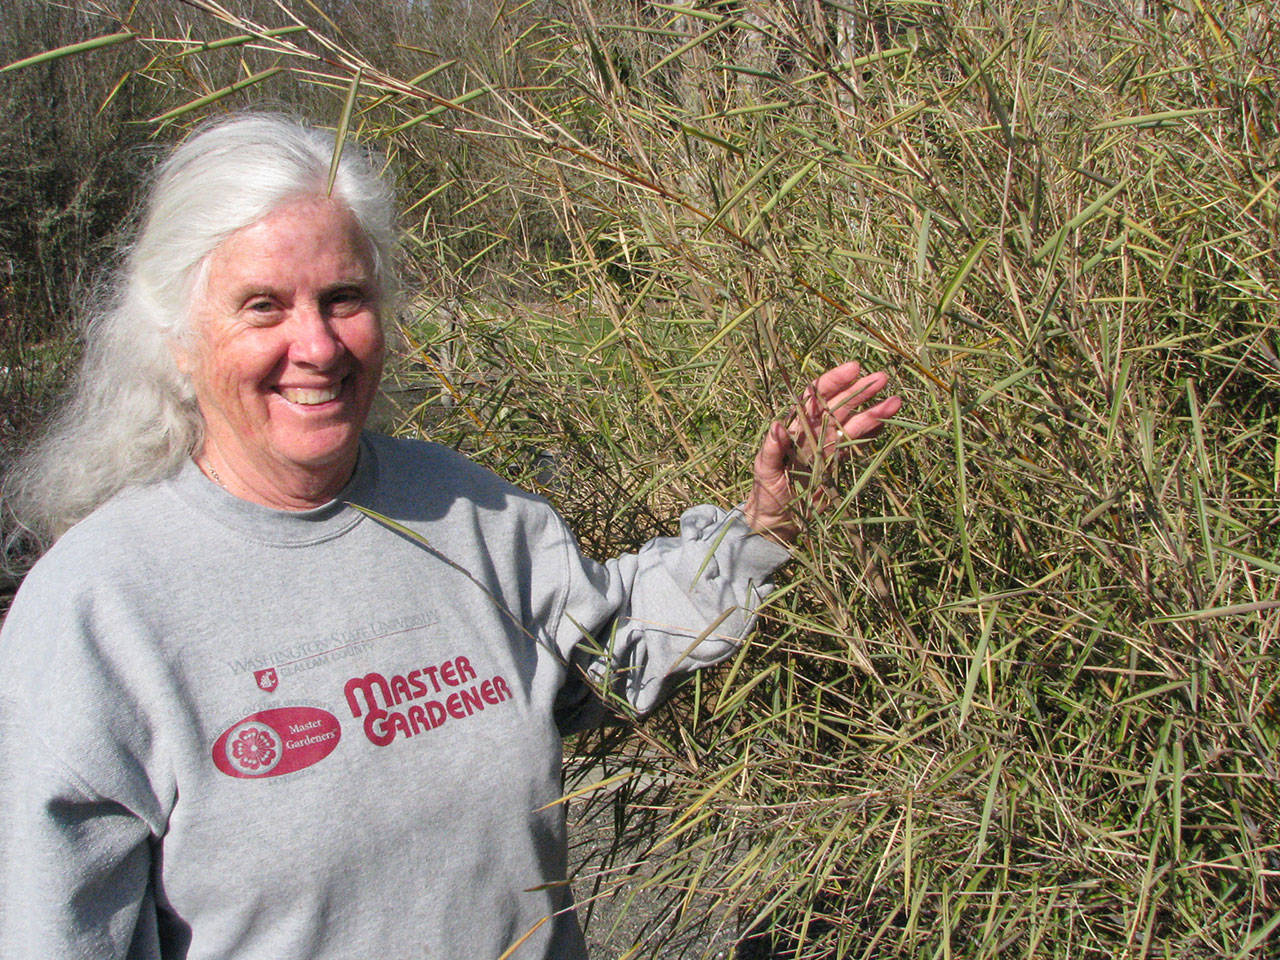 Veteran Master Gardener Janet Oja will discuss bamboo, grasses and sedges at noon today in the county commissioners meeting room of the Clallam County Courthouse. (Amanda Rosenberg)